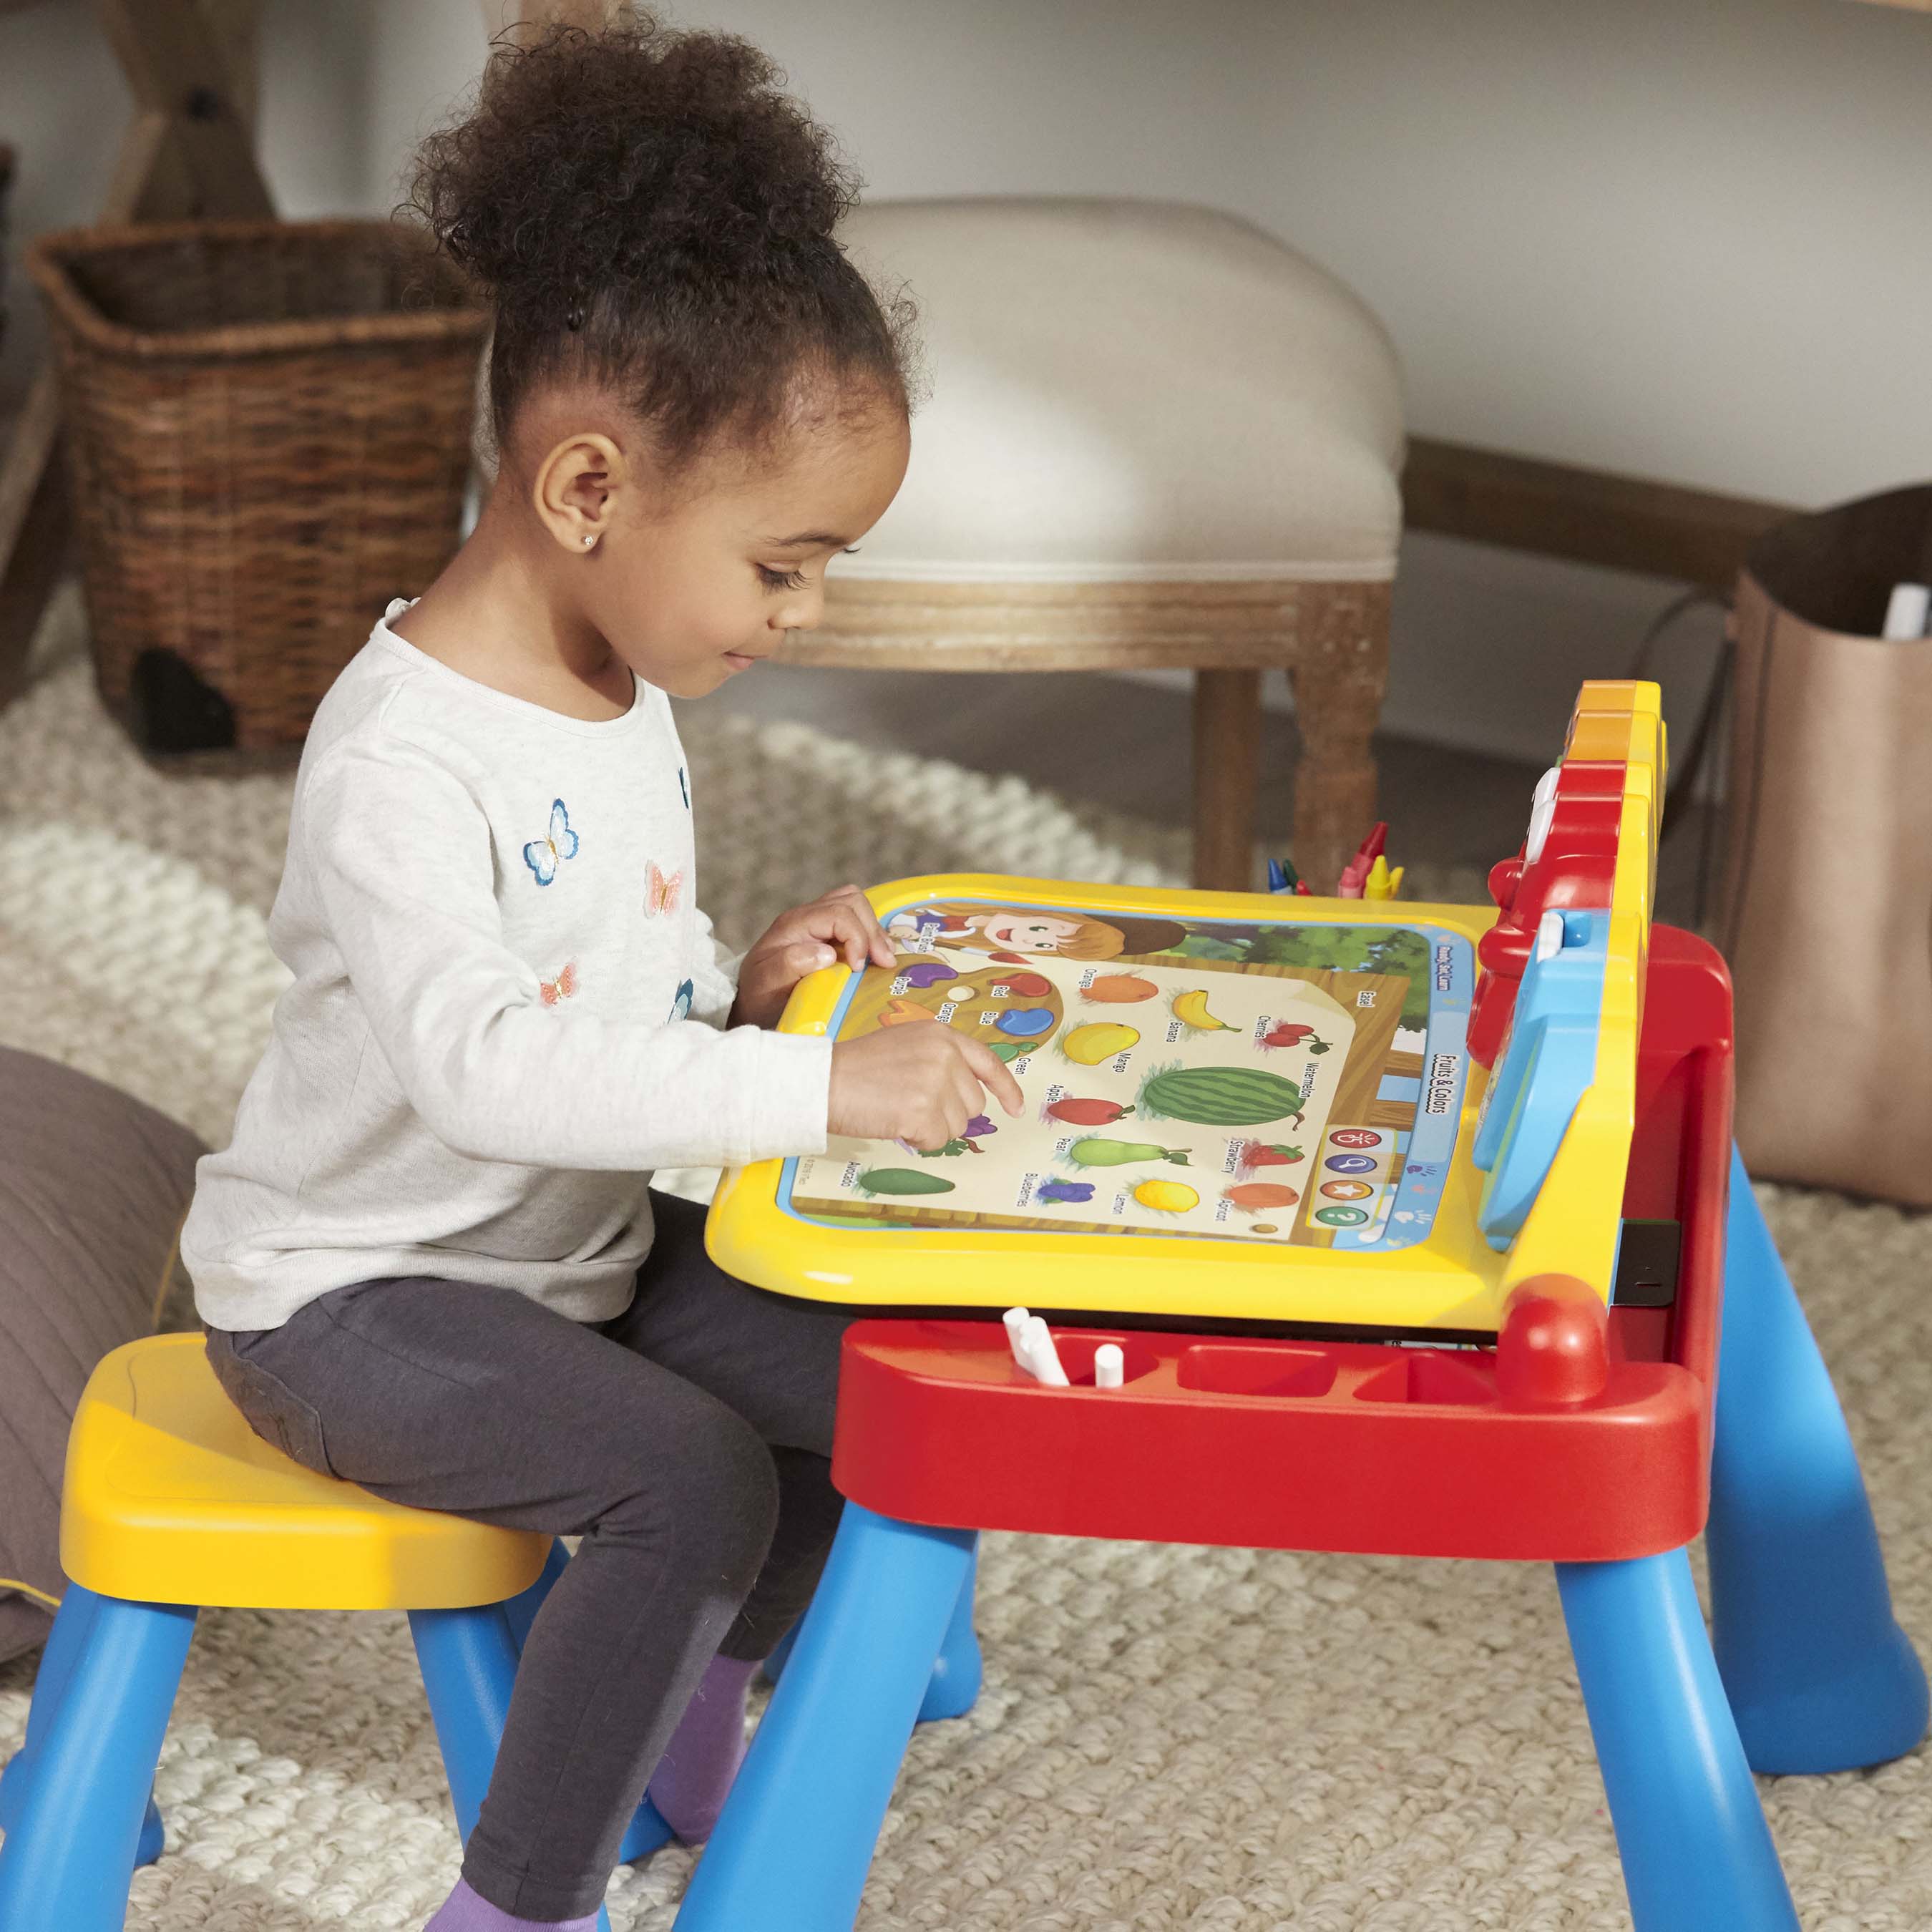 vtech touch and learn activity desk music player